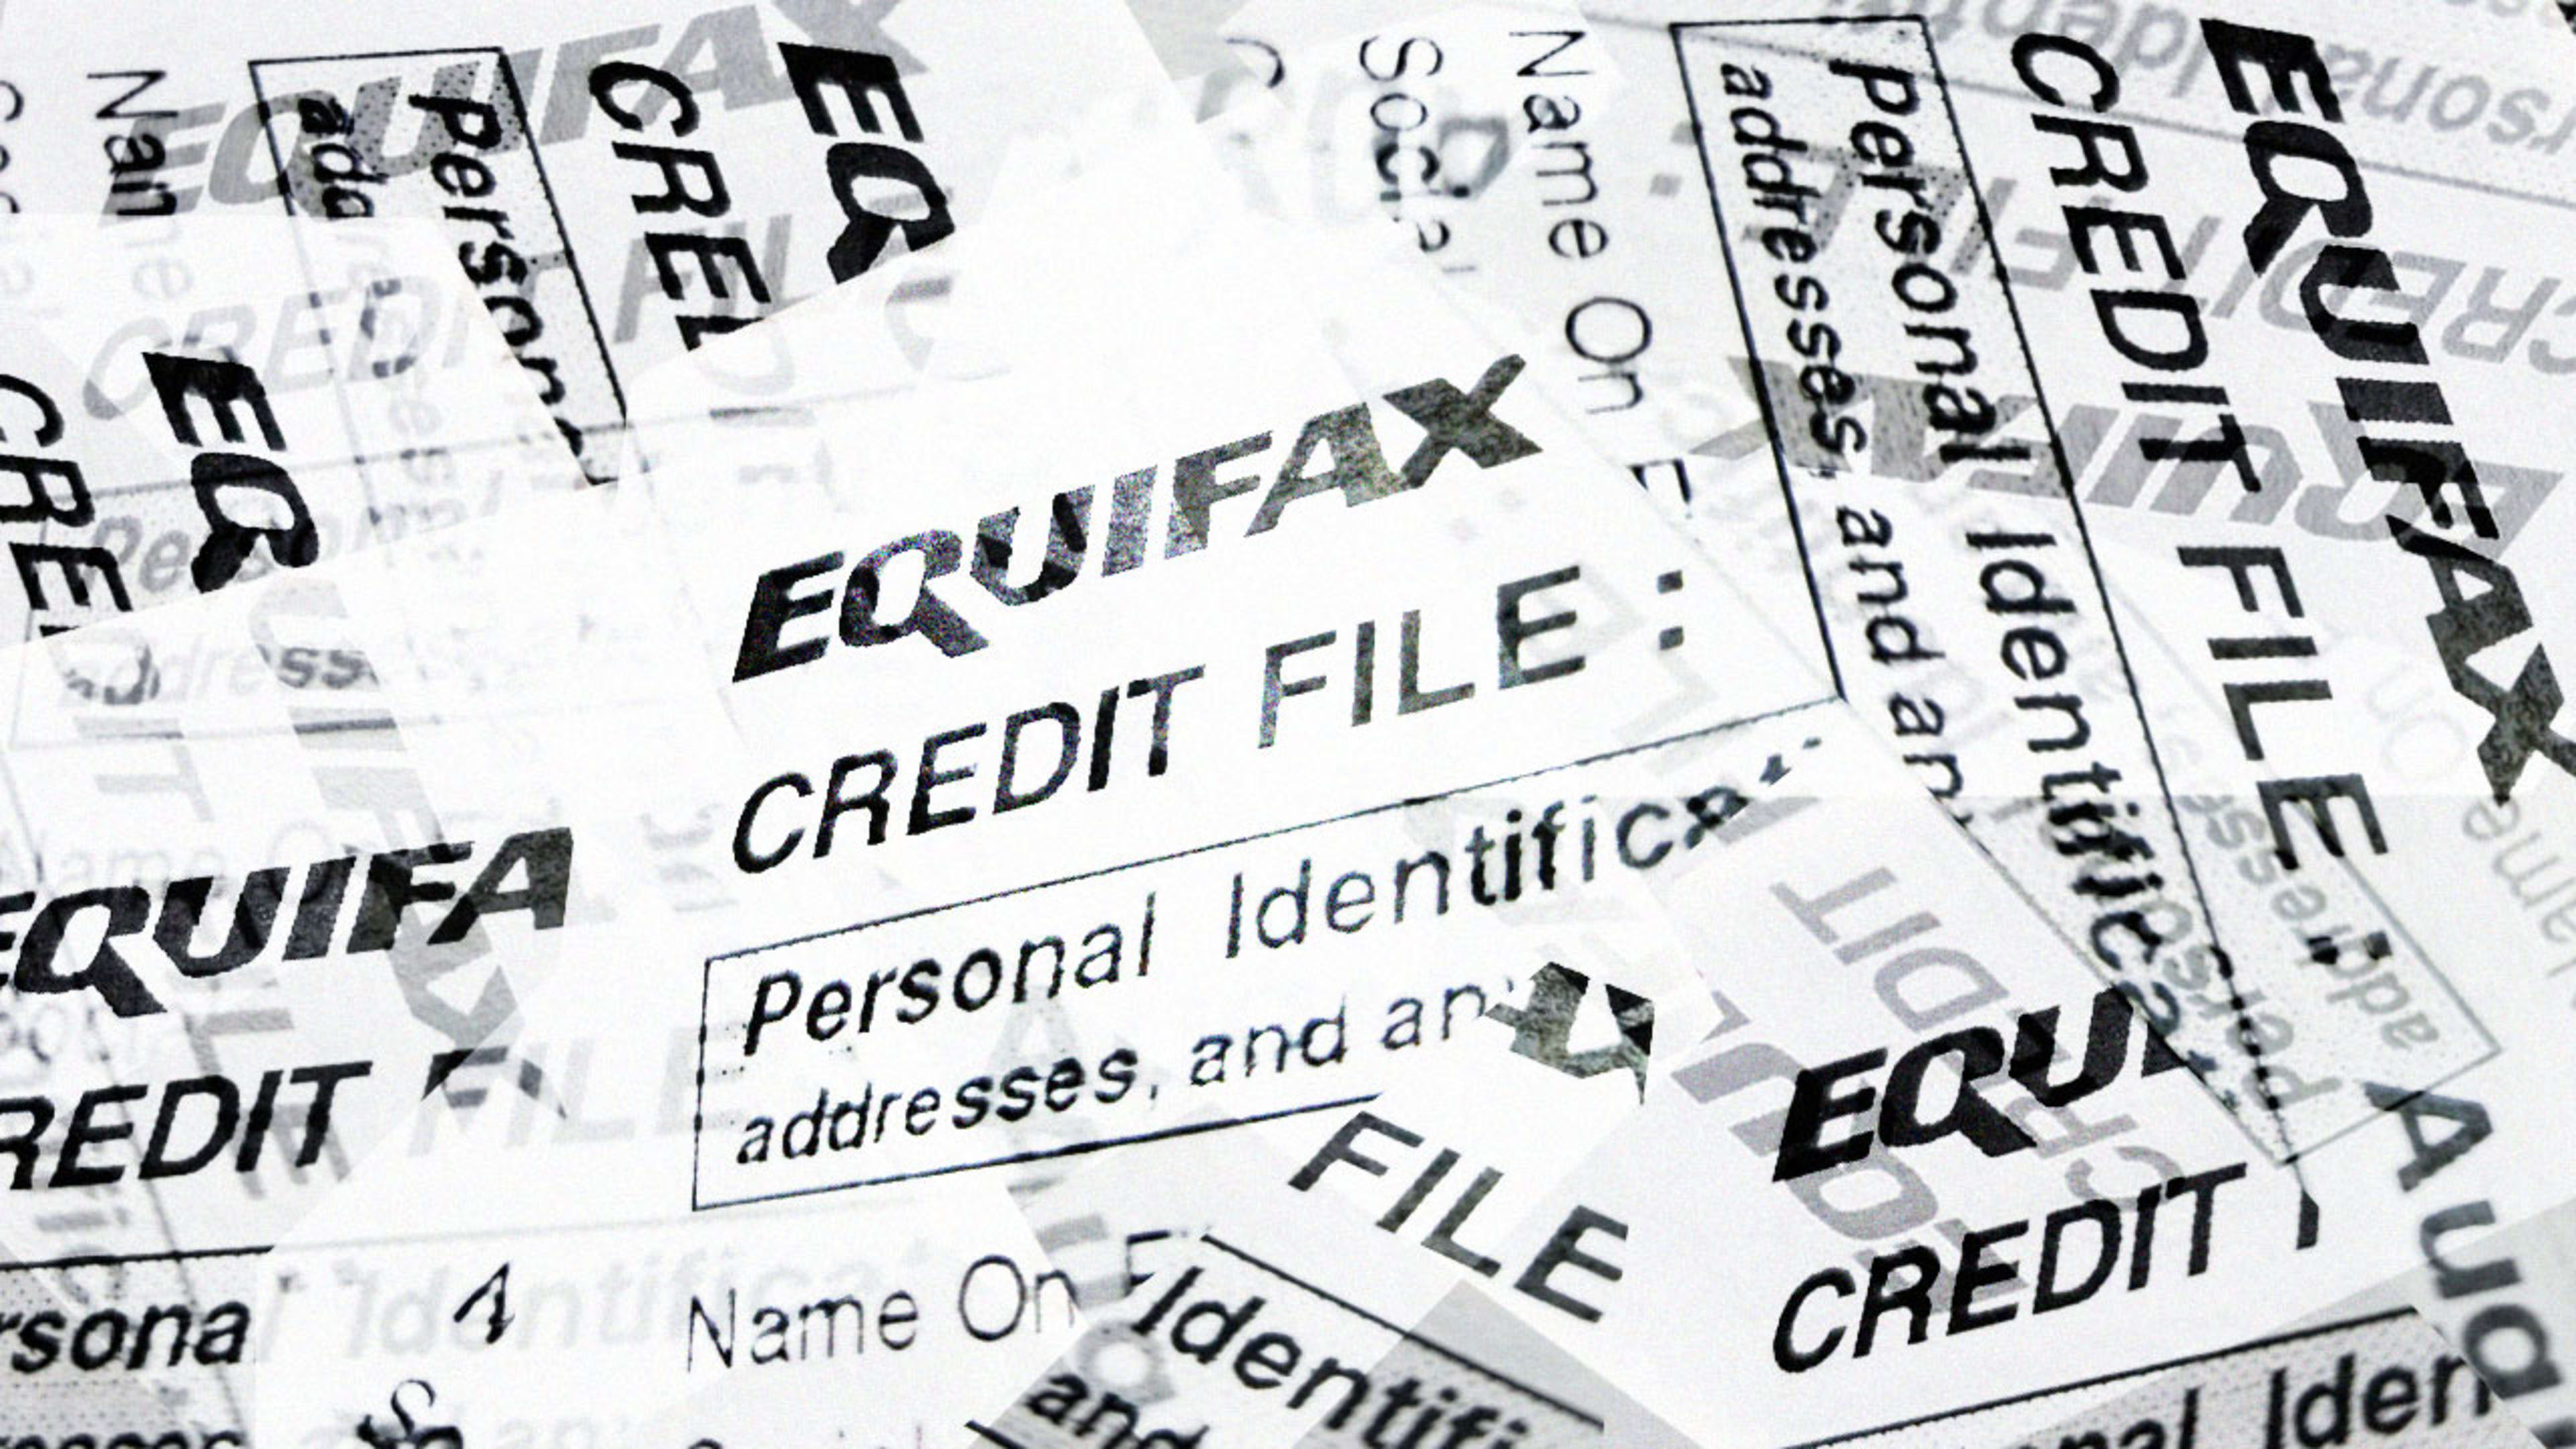 The Dizzying Number Of CFPB Complaints Against Equifax Since 2012 Should Infuriate You